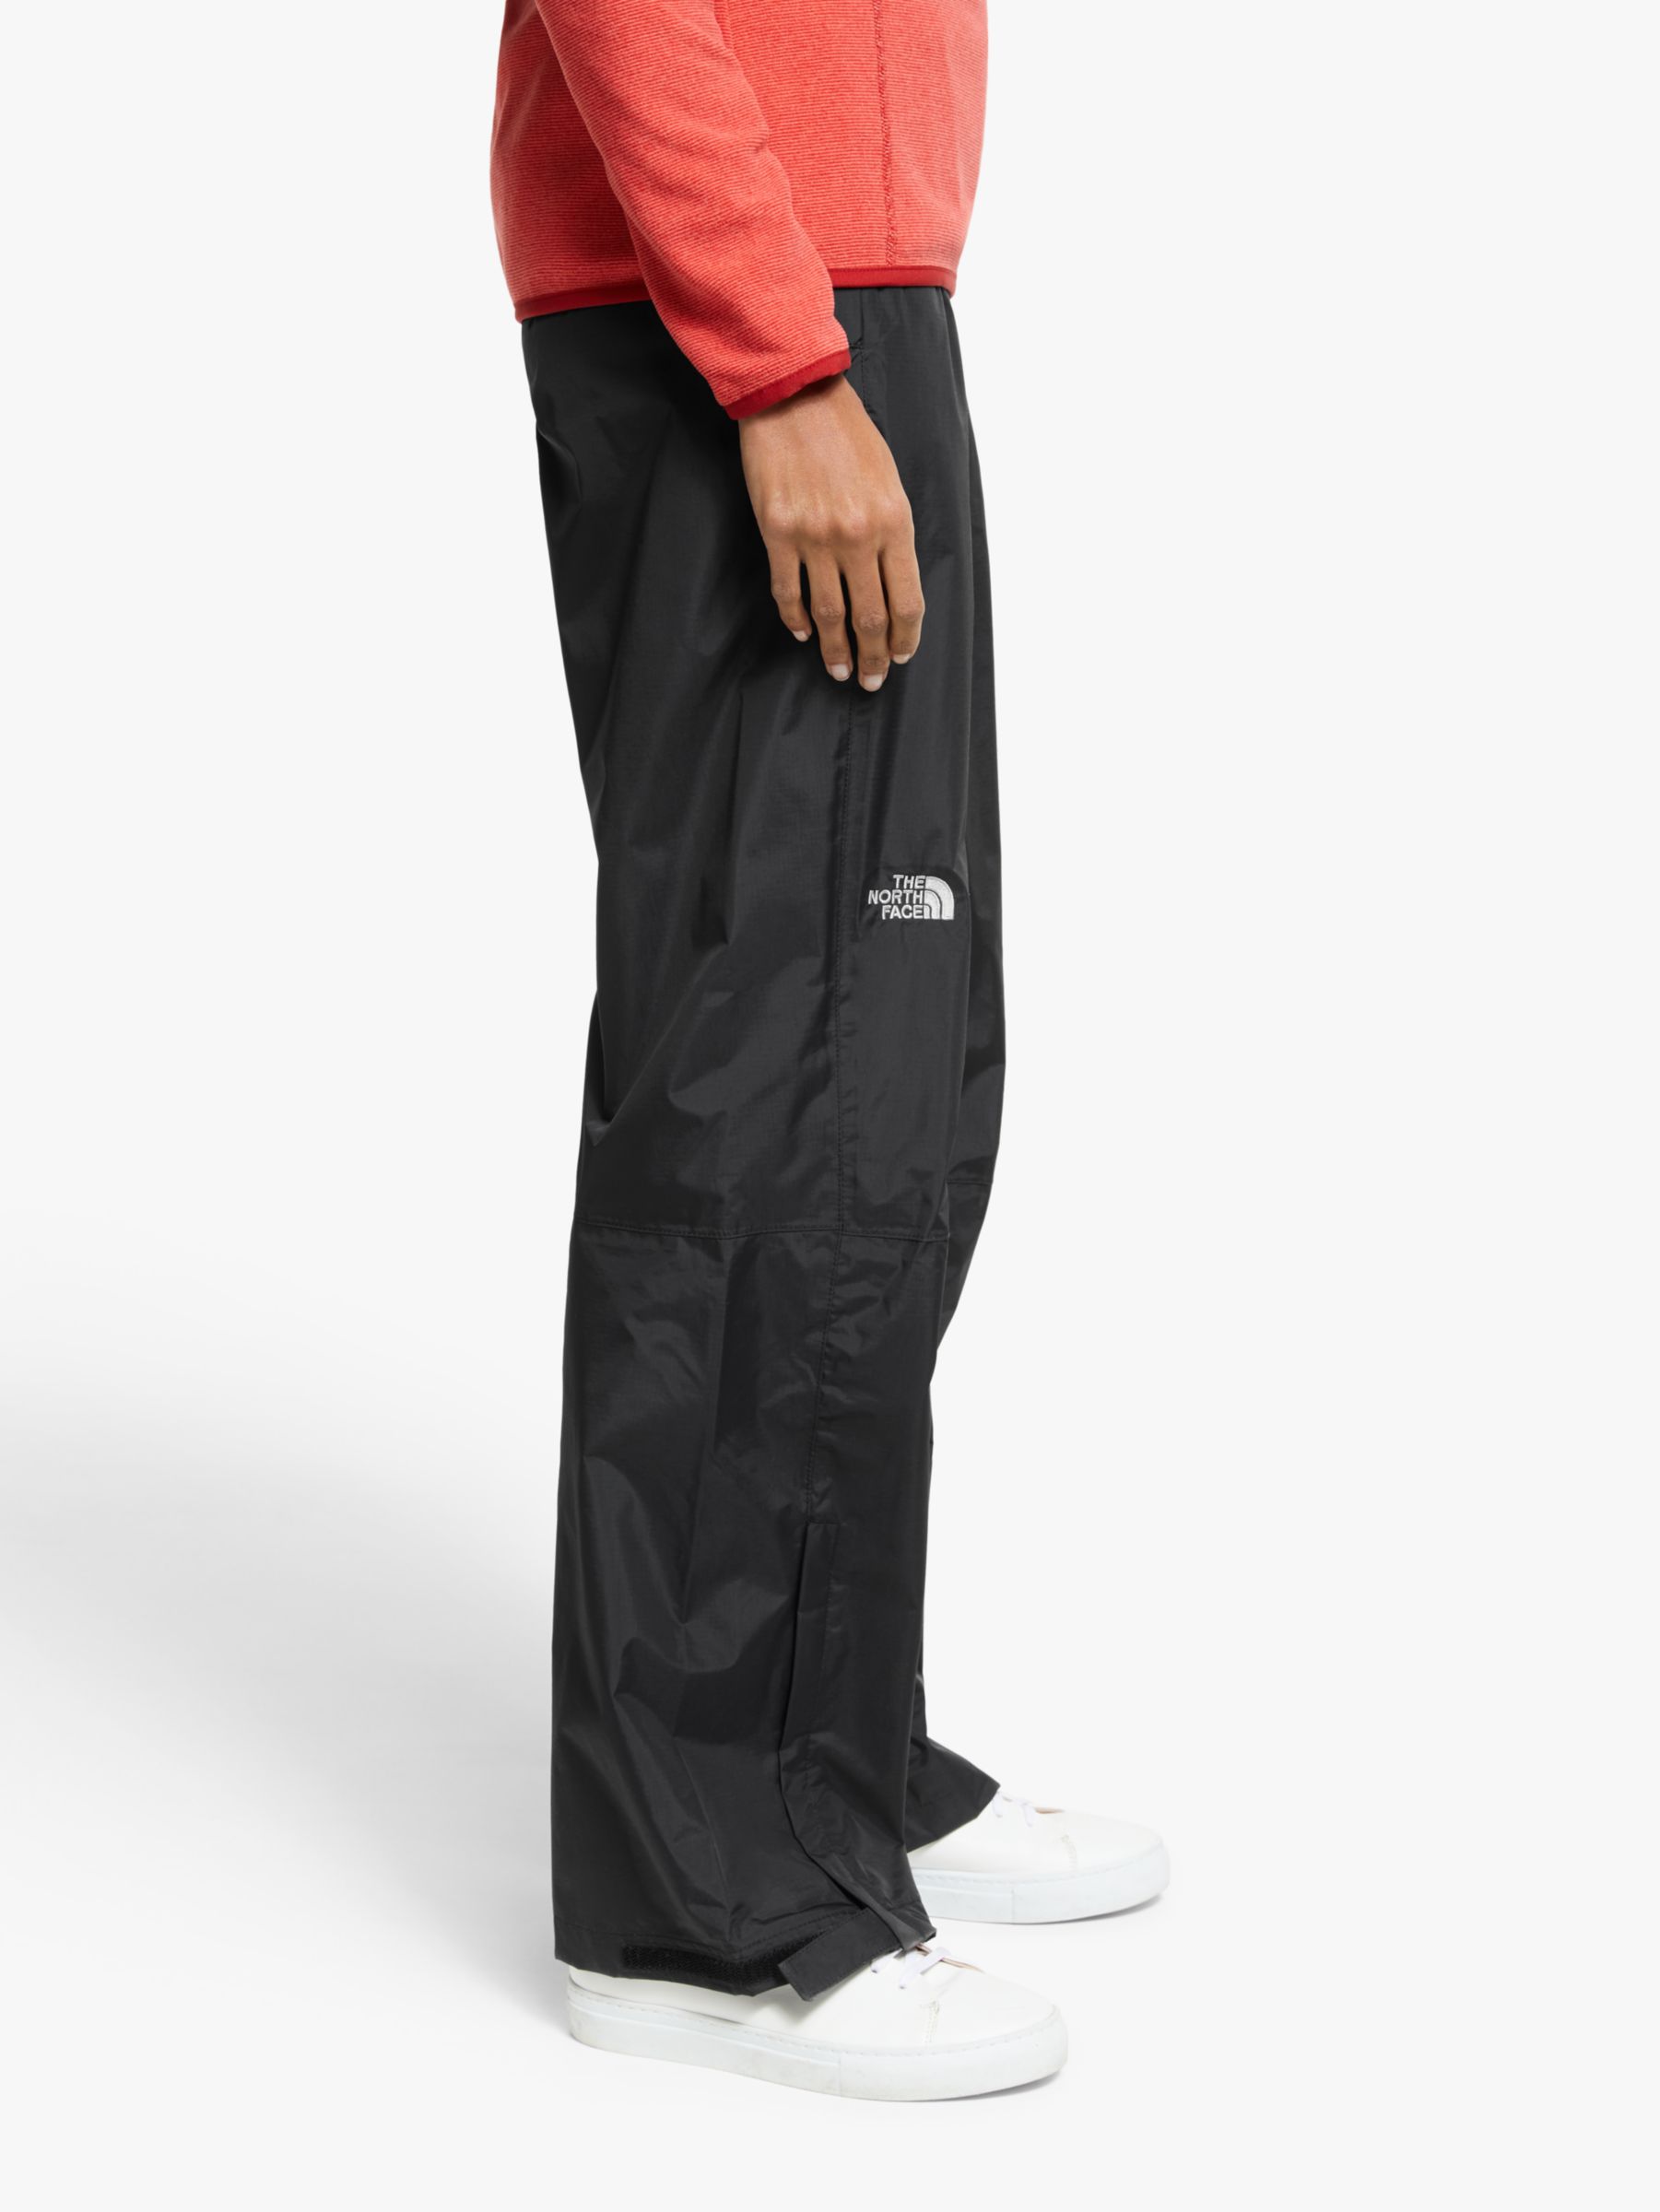 resolve pant north face